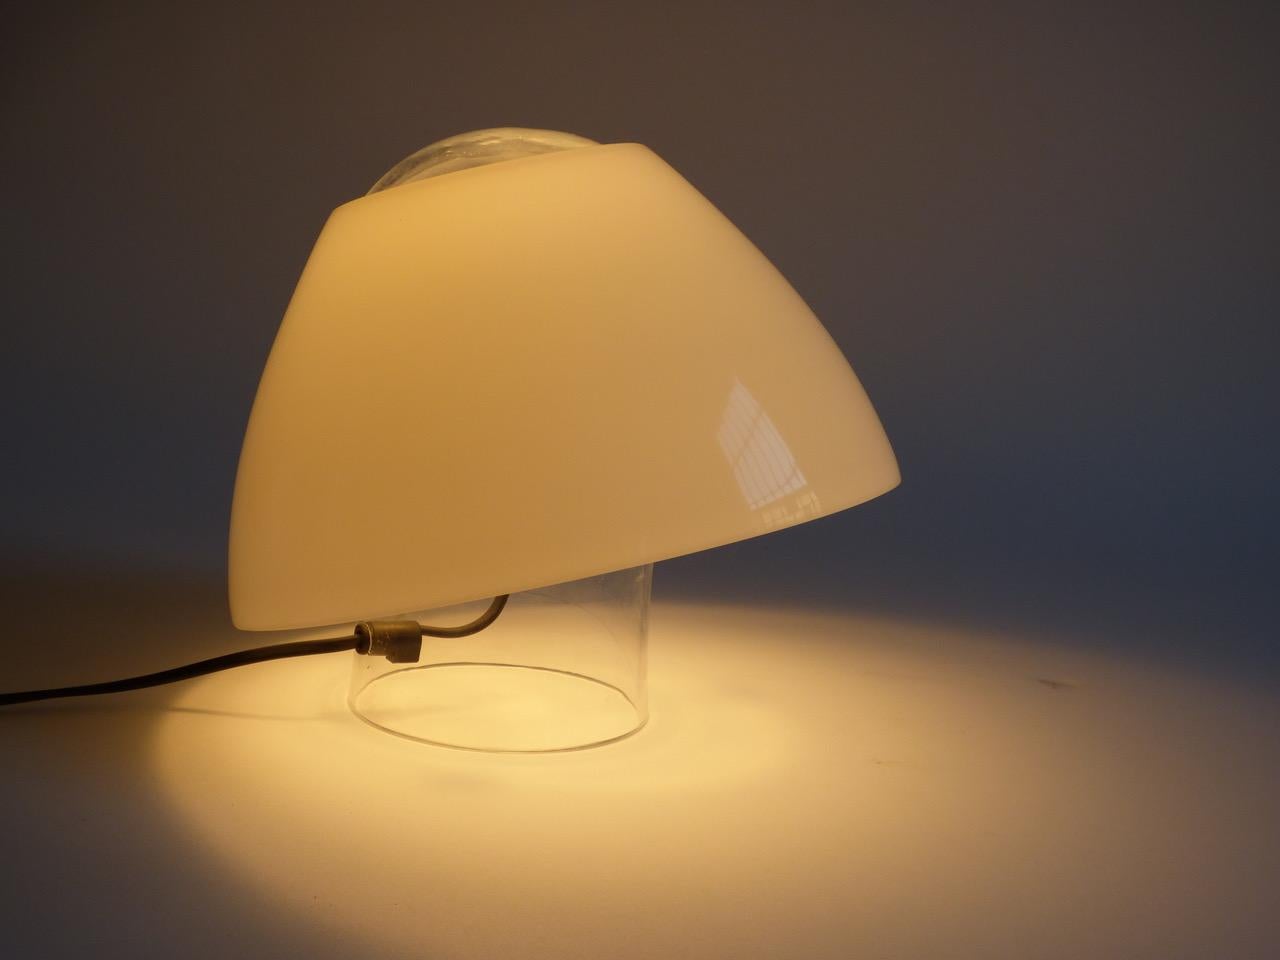 Modern Angelo Mangiarotti Table Lamp, Polluce Collection, Skipper, Italy